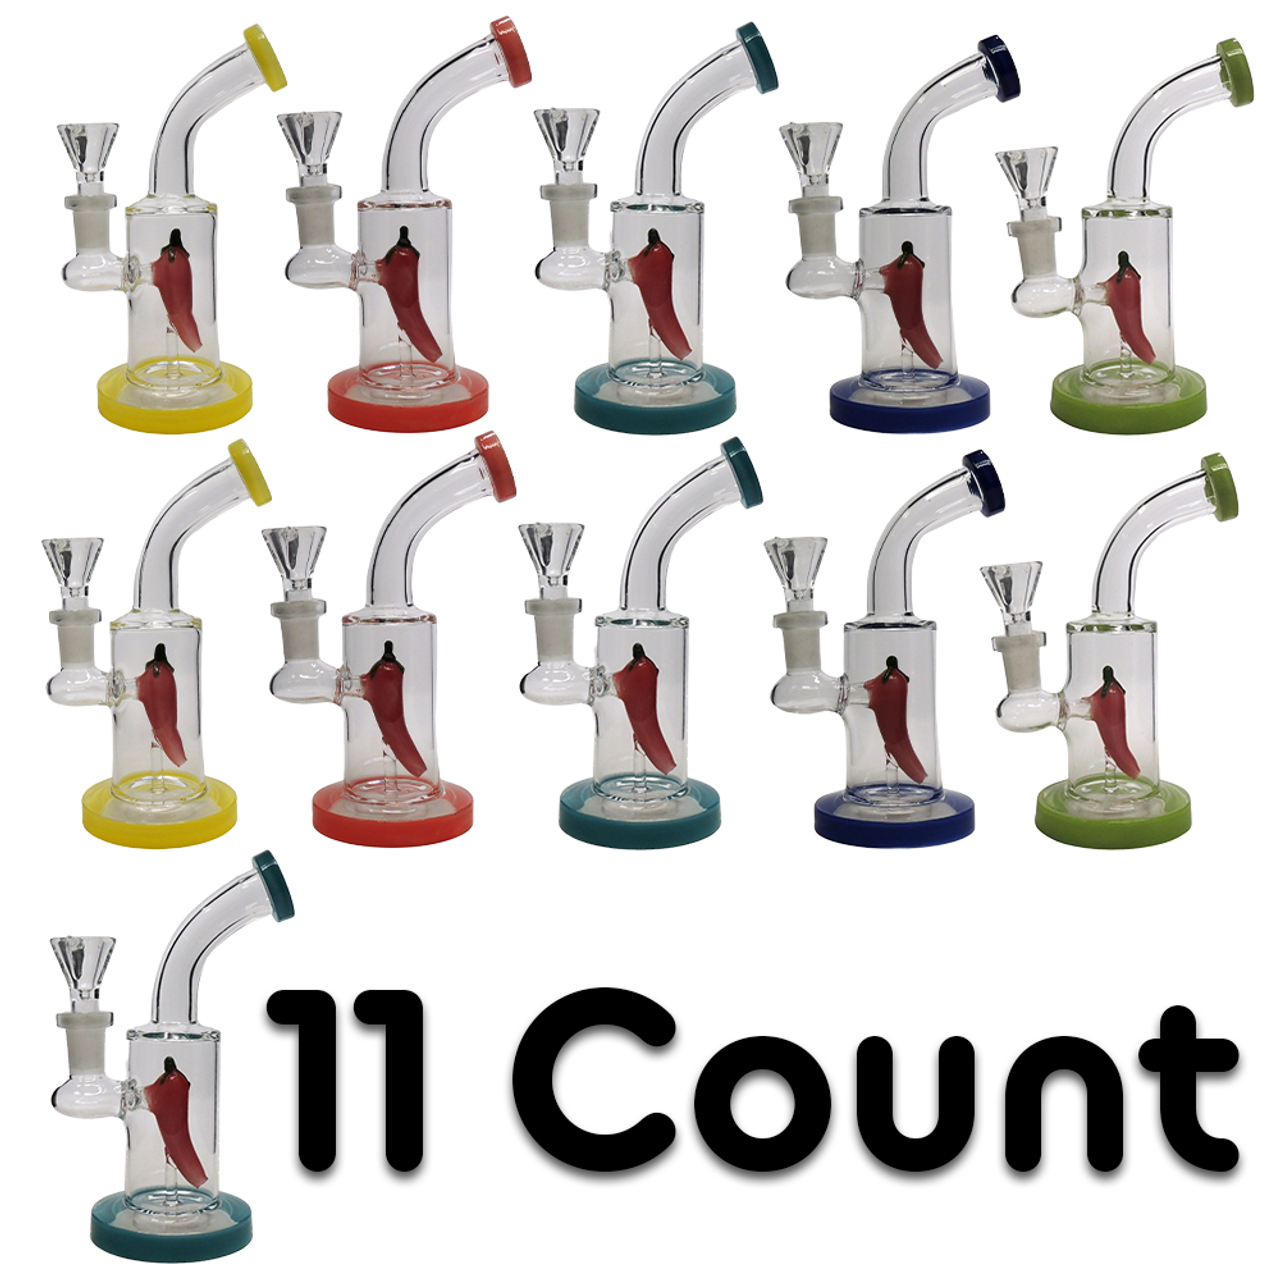 6" Bent Neck with Pepper - Assorted - Set of 11